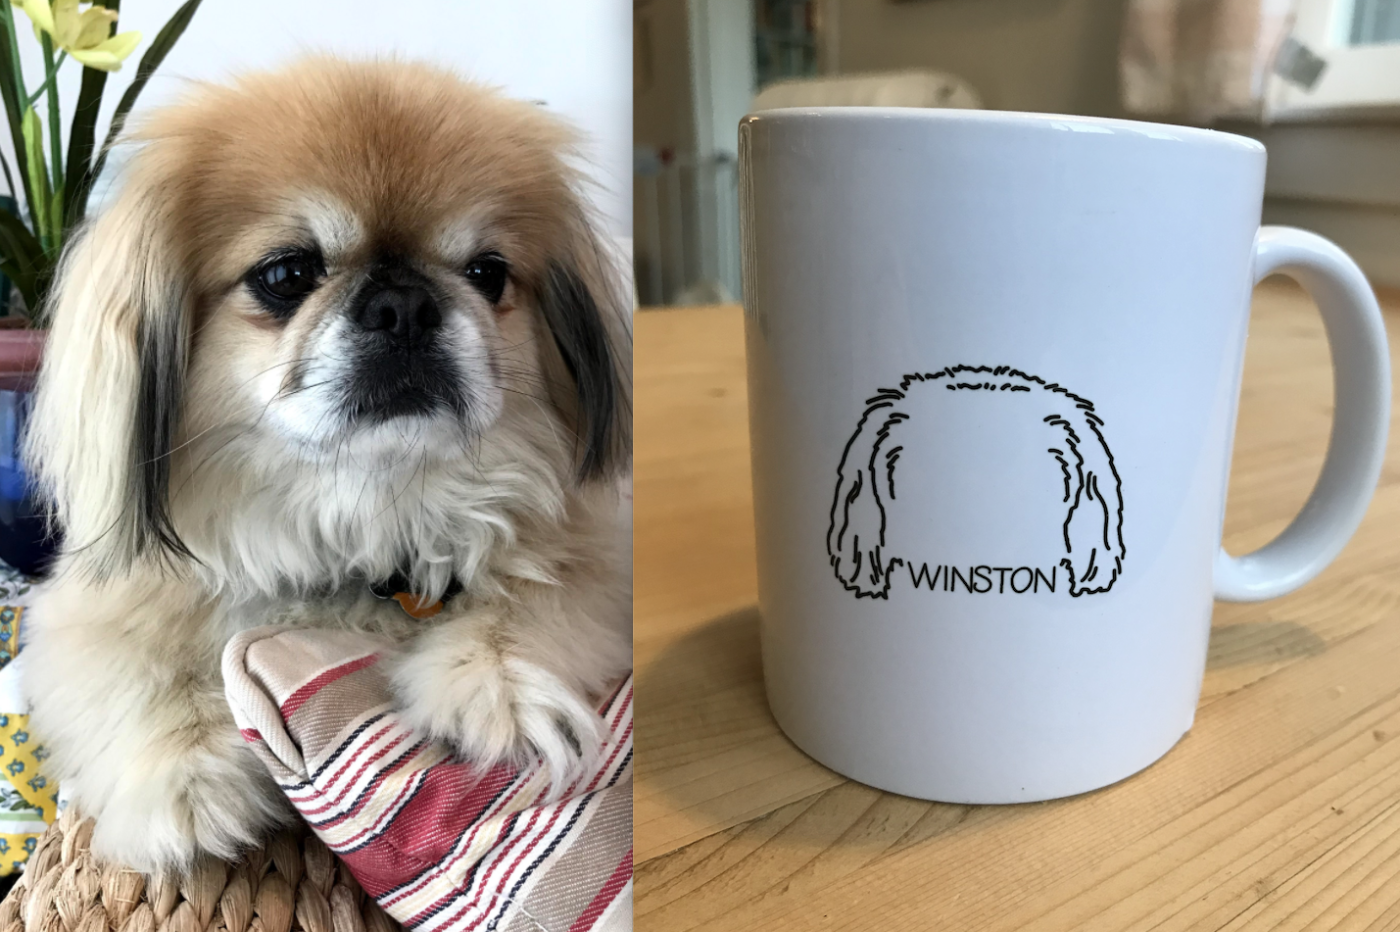 At left, a photograph of a dog named Winston. At right, a mug with an outline of Winston's head and the text "Winston".